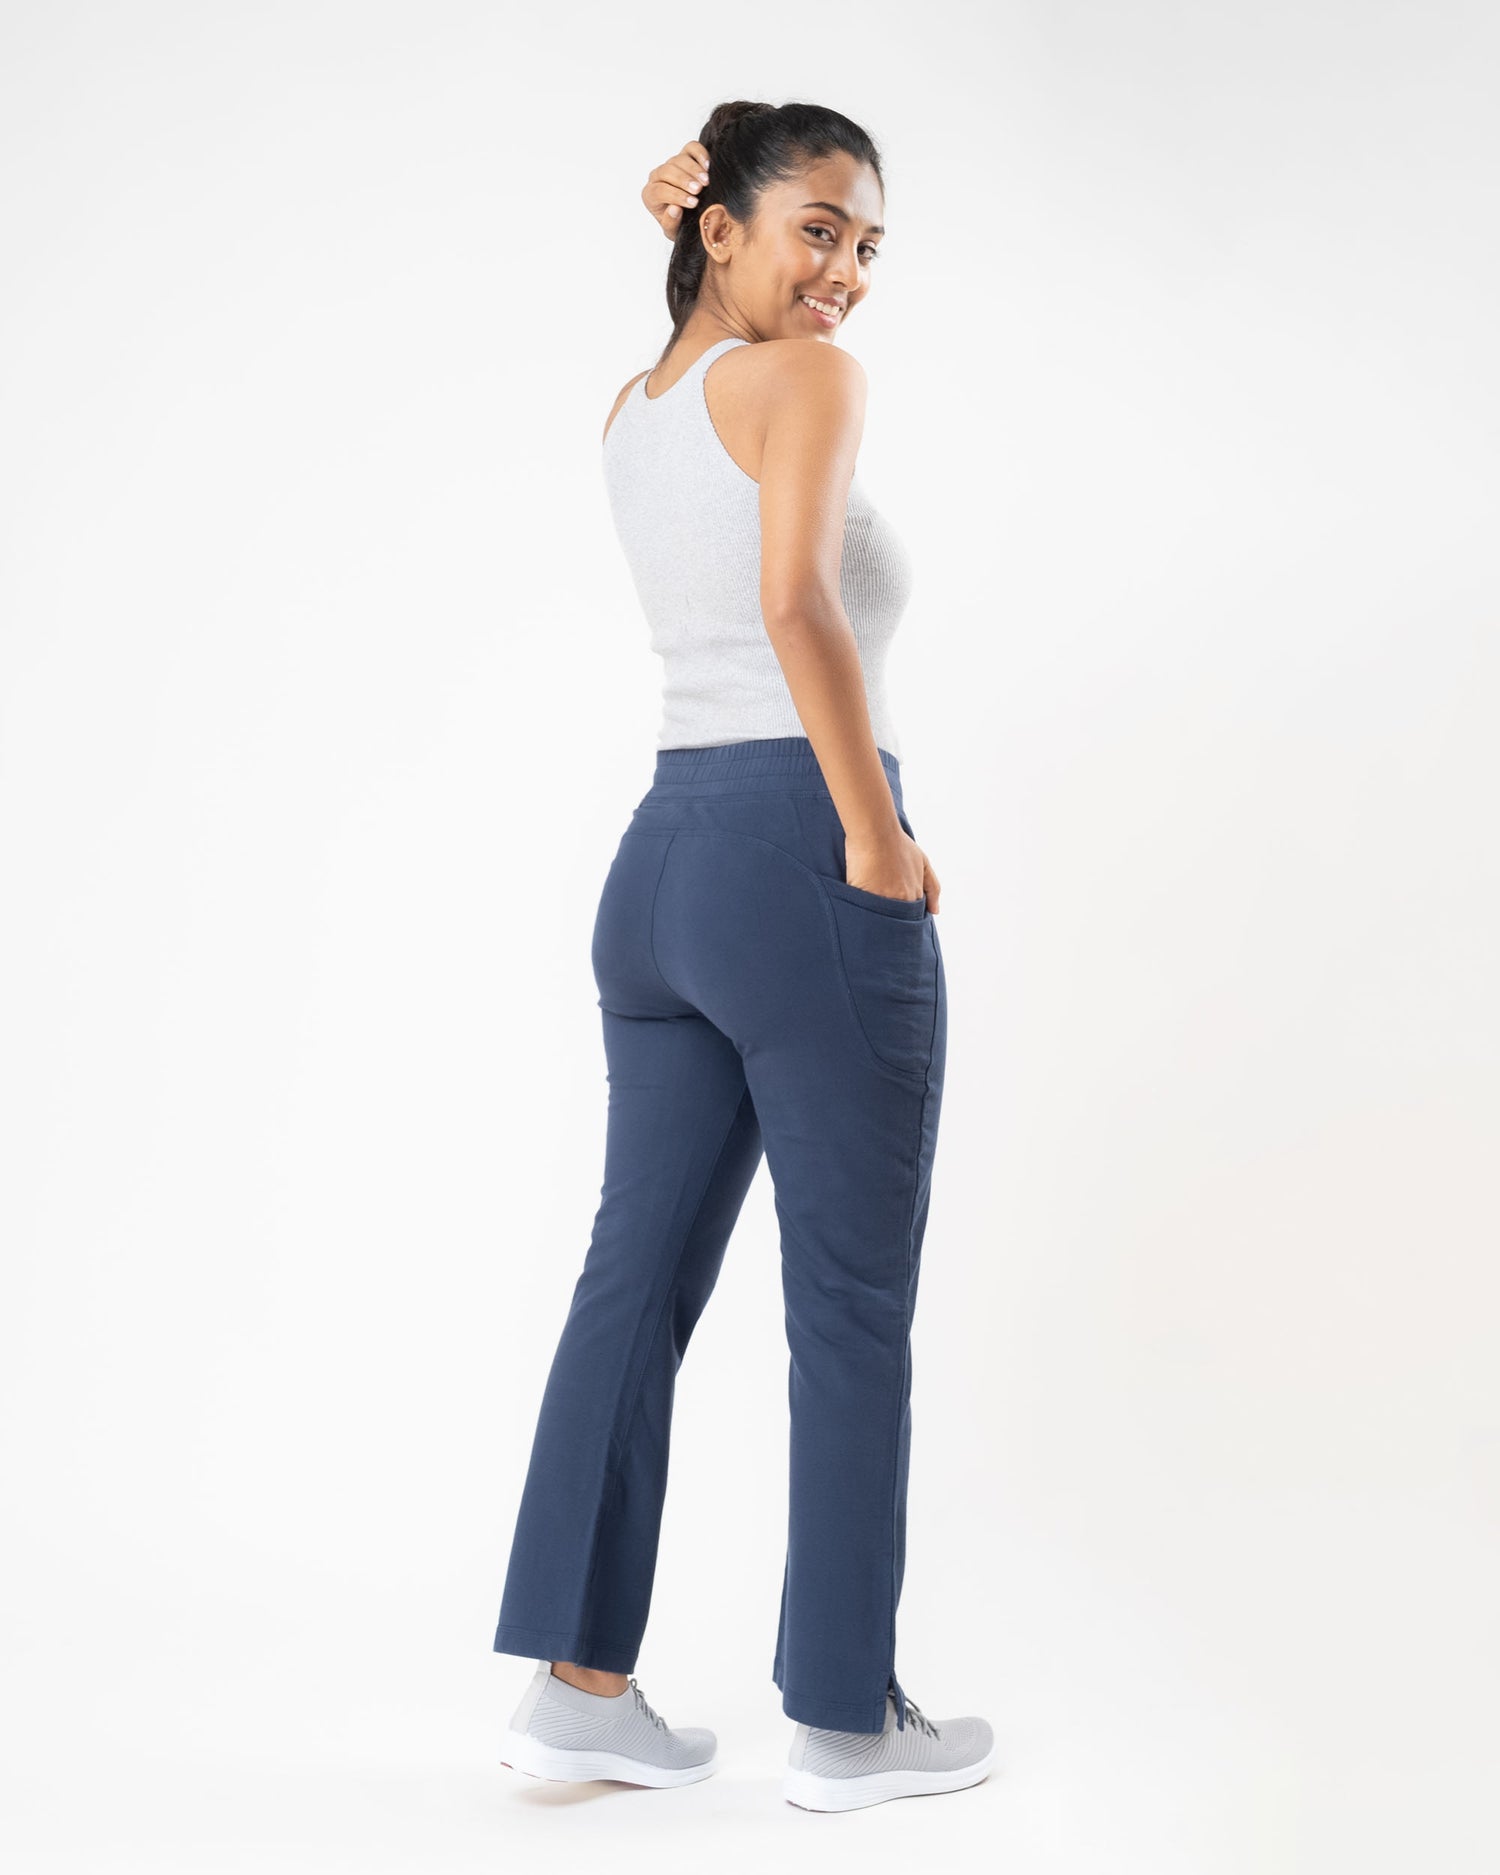 The Summer Pants From Target That Everyone Loves | HuffPost Life